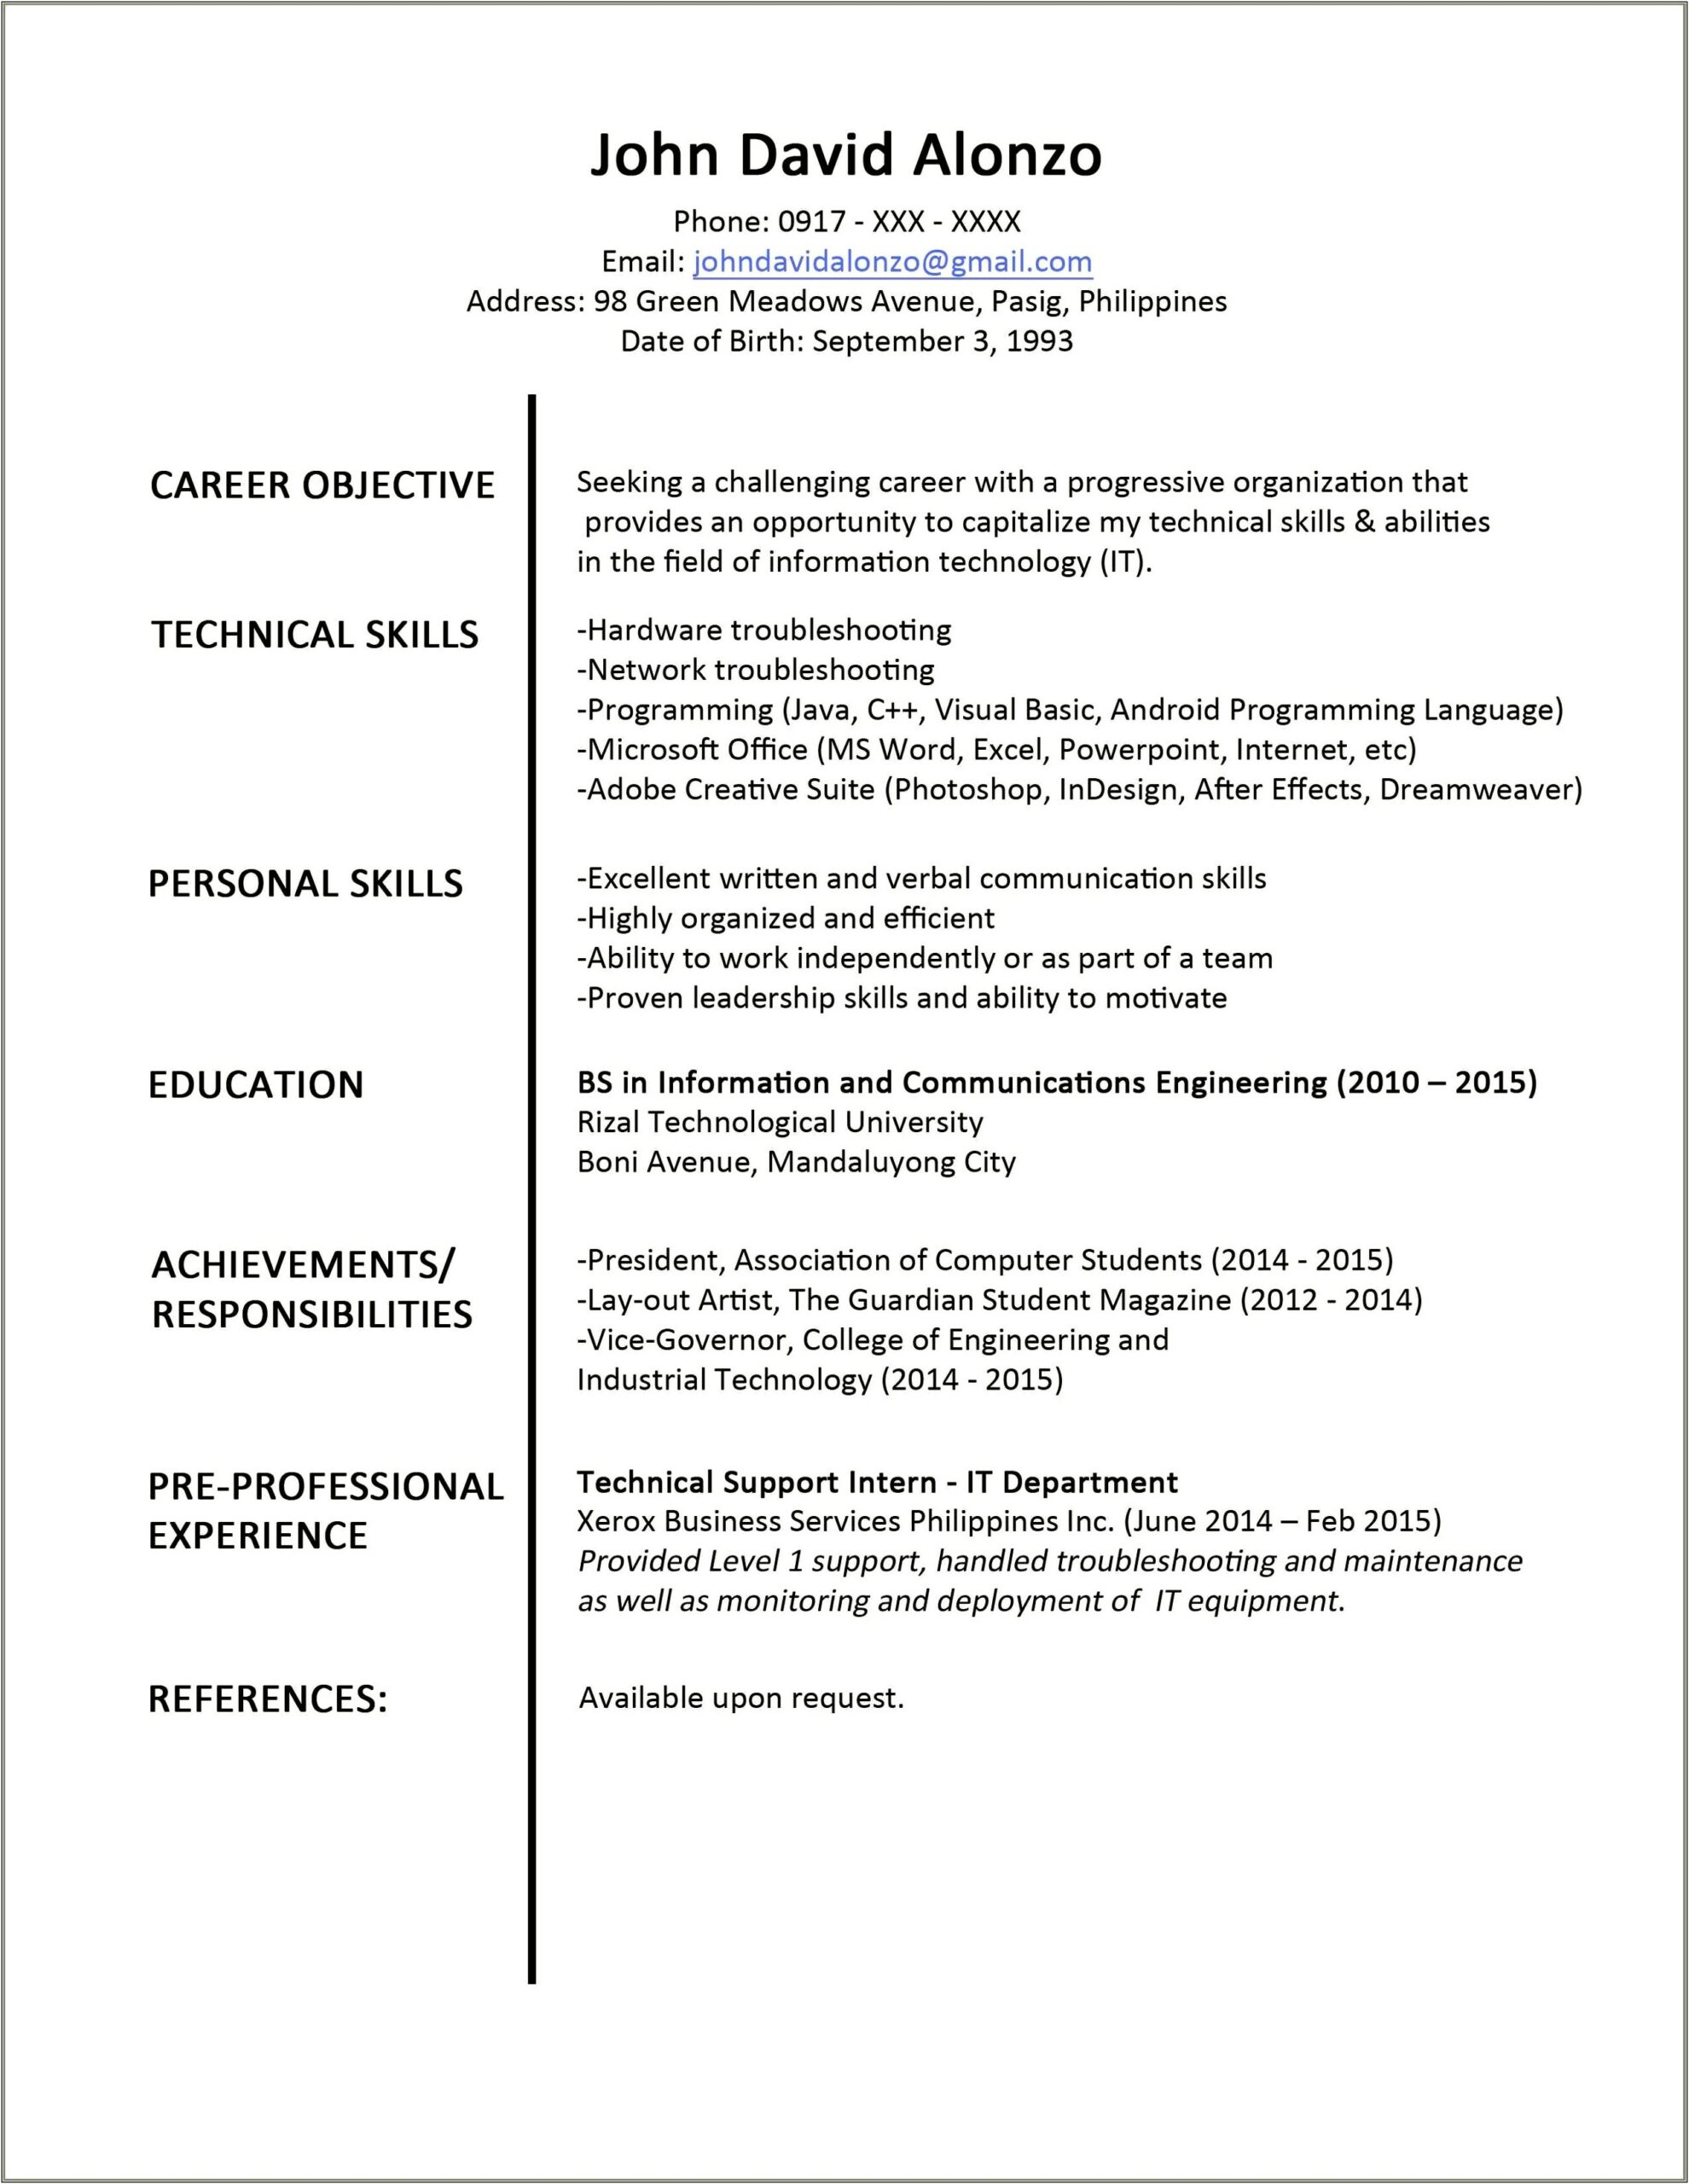 Best Operations Manager Resume Example Livecareerlivecareer